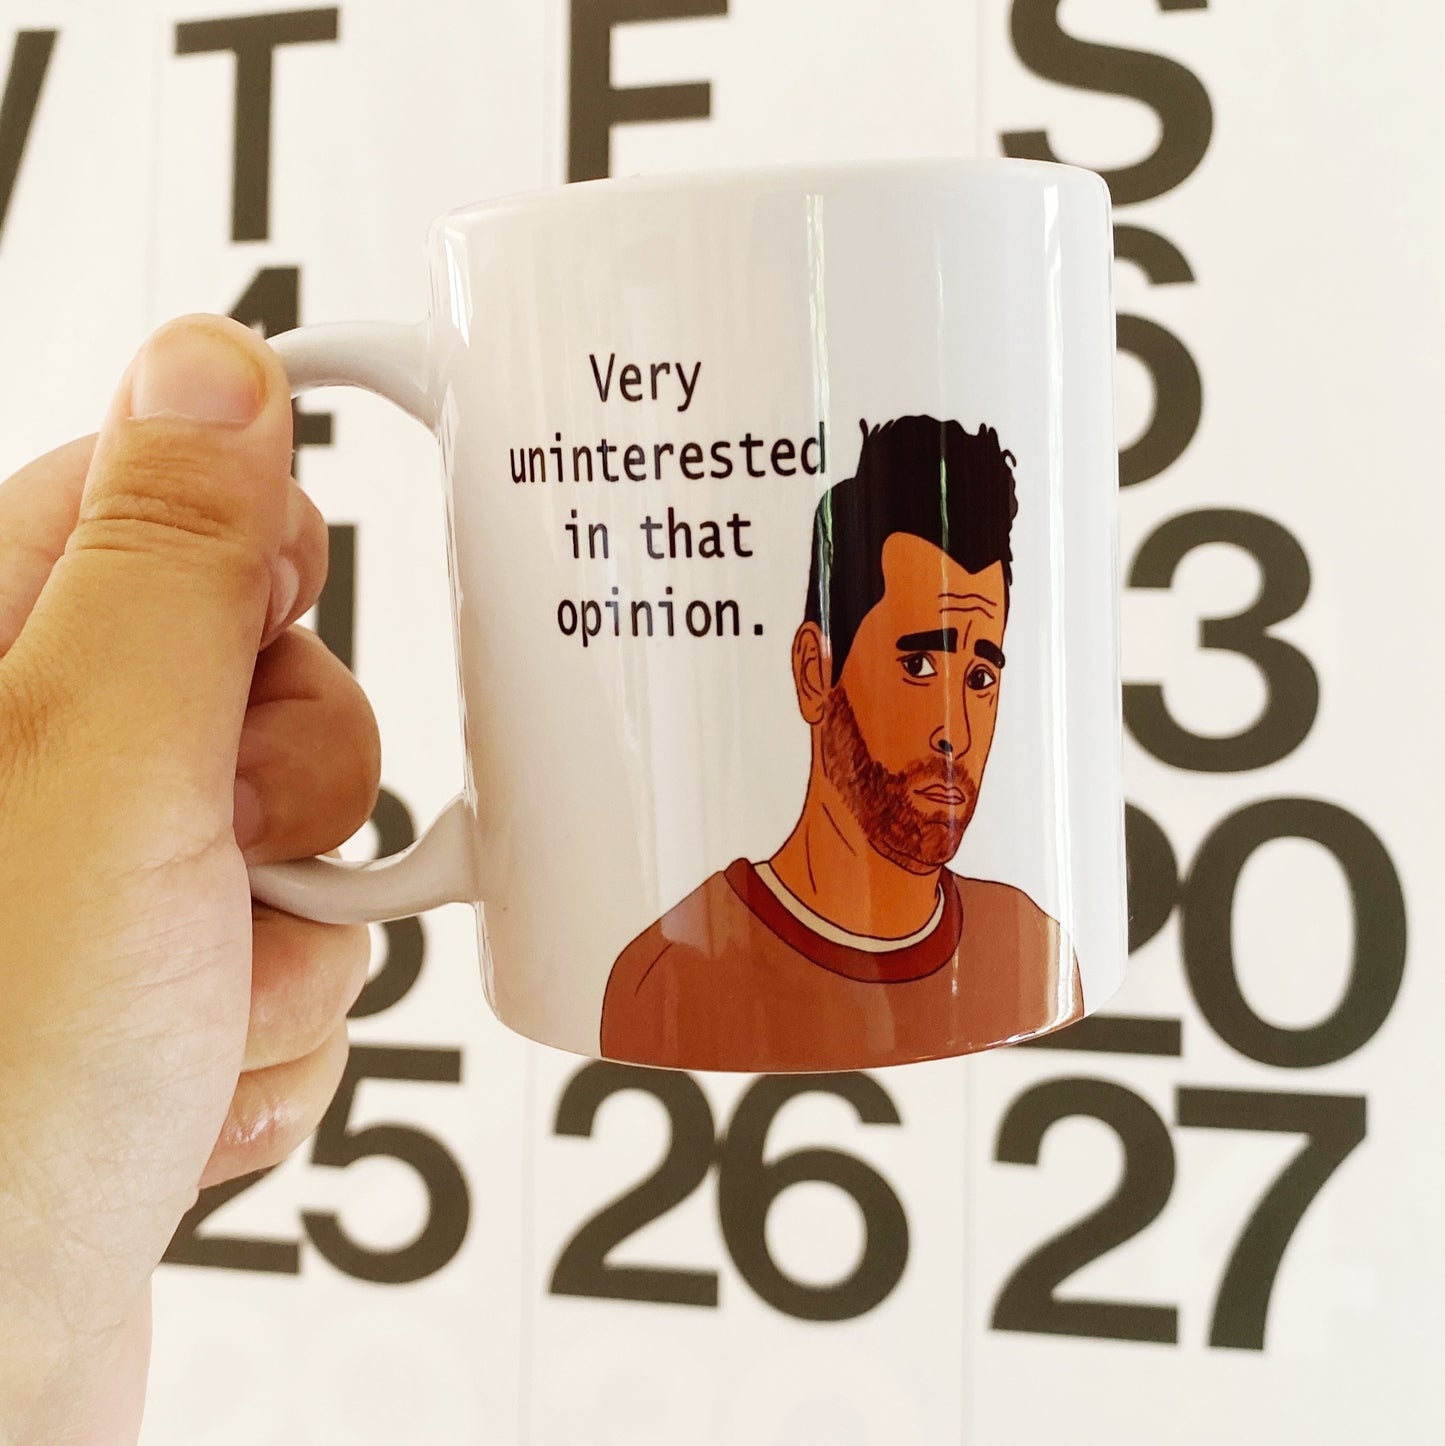 Very uninterested in that opinion schitts creek mug